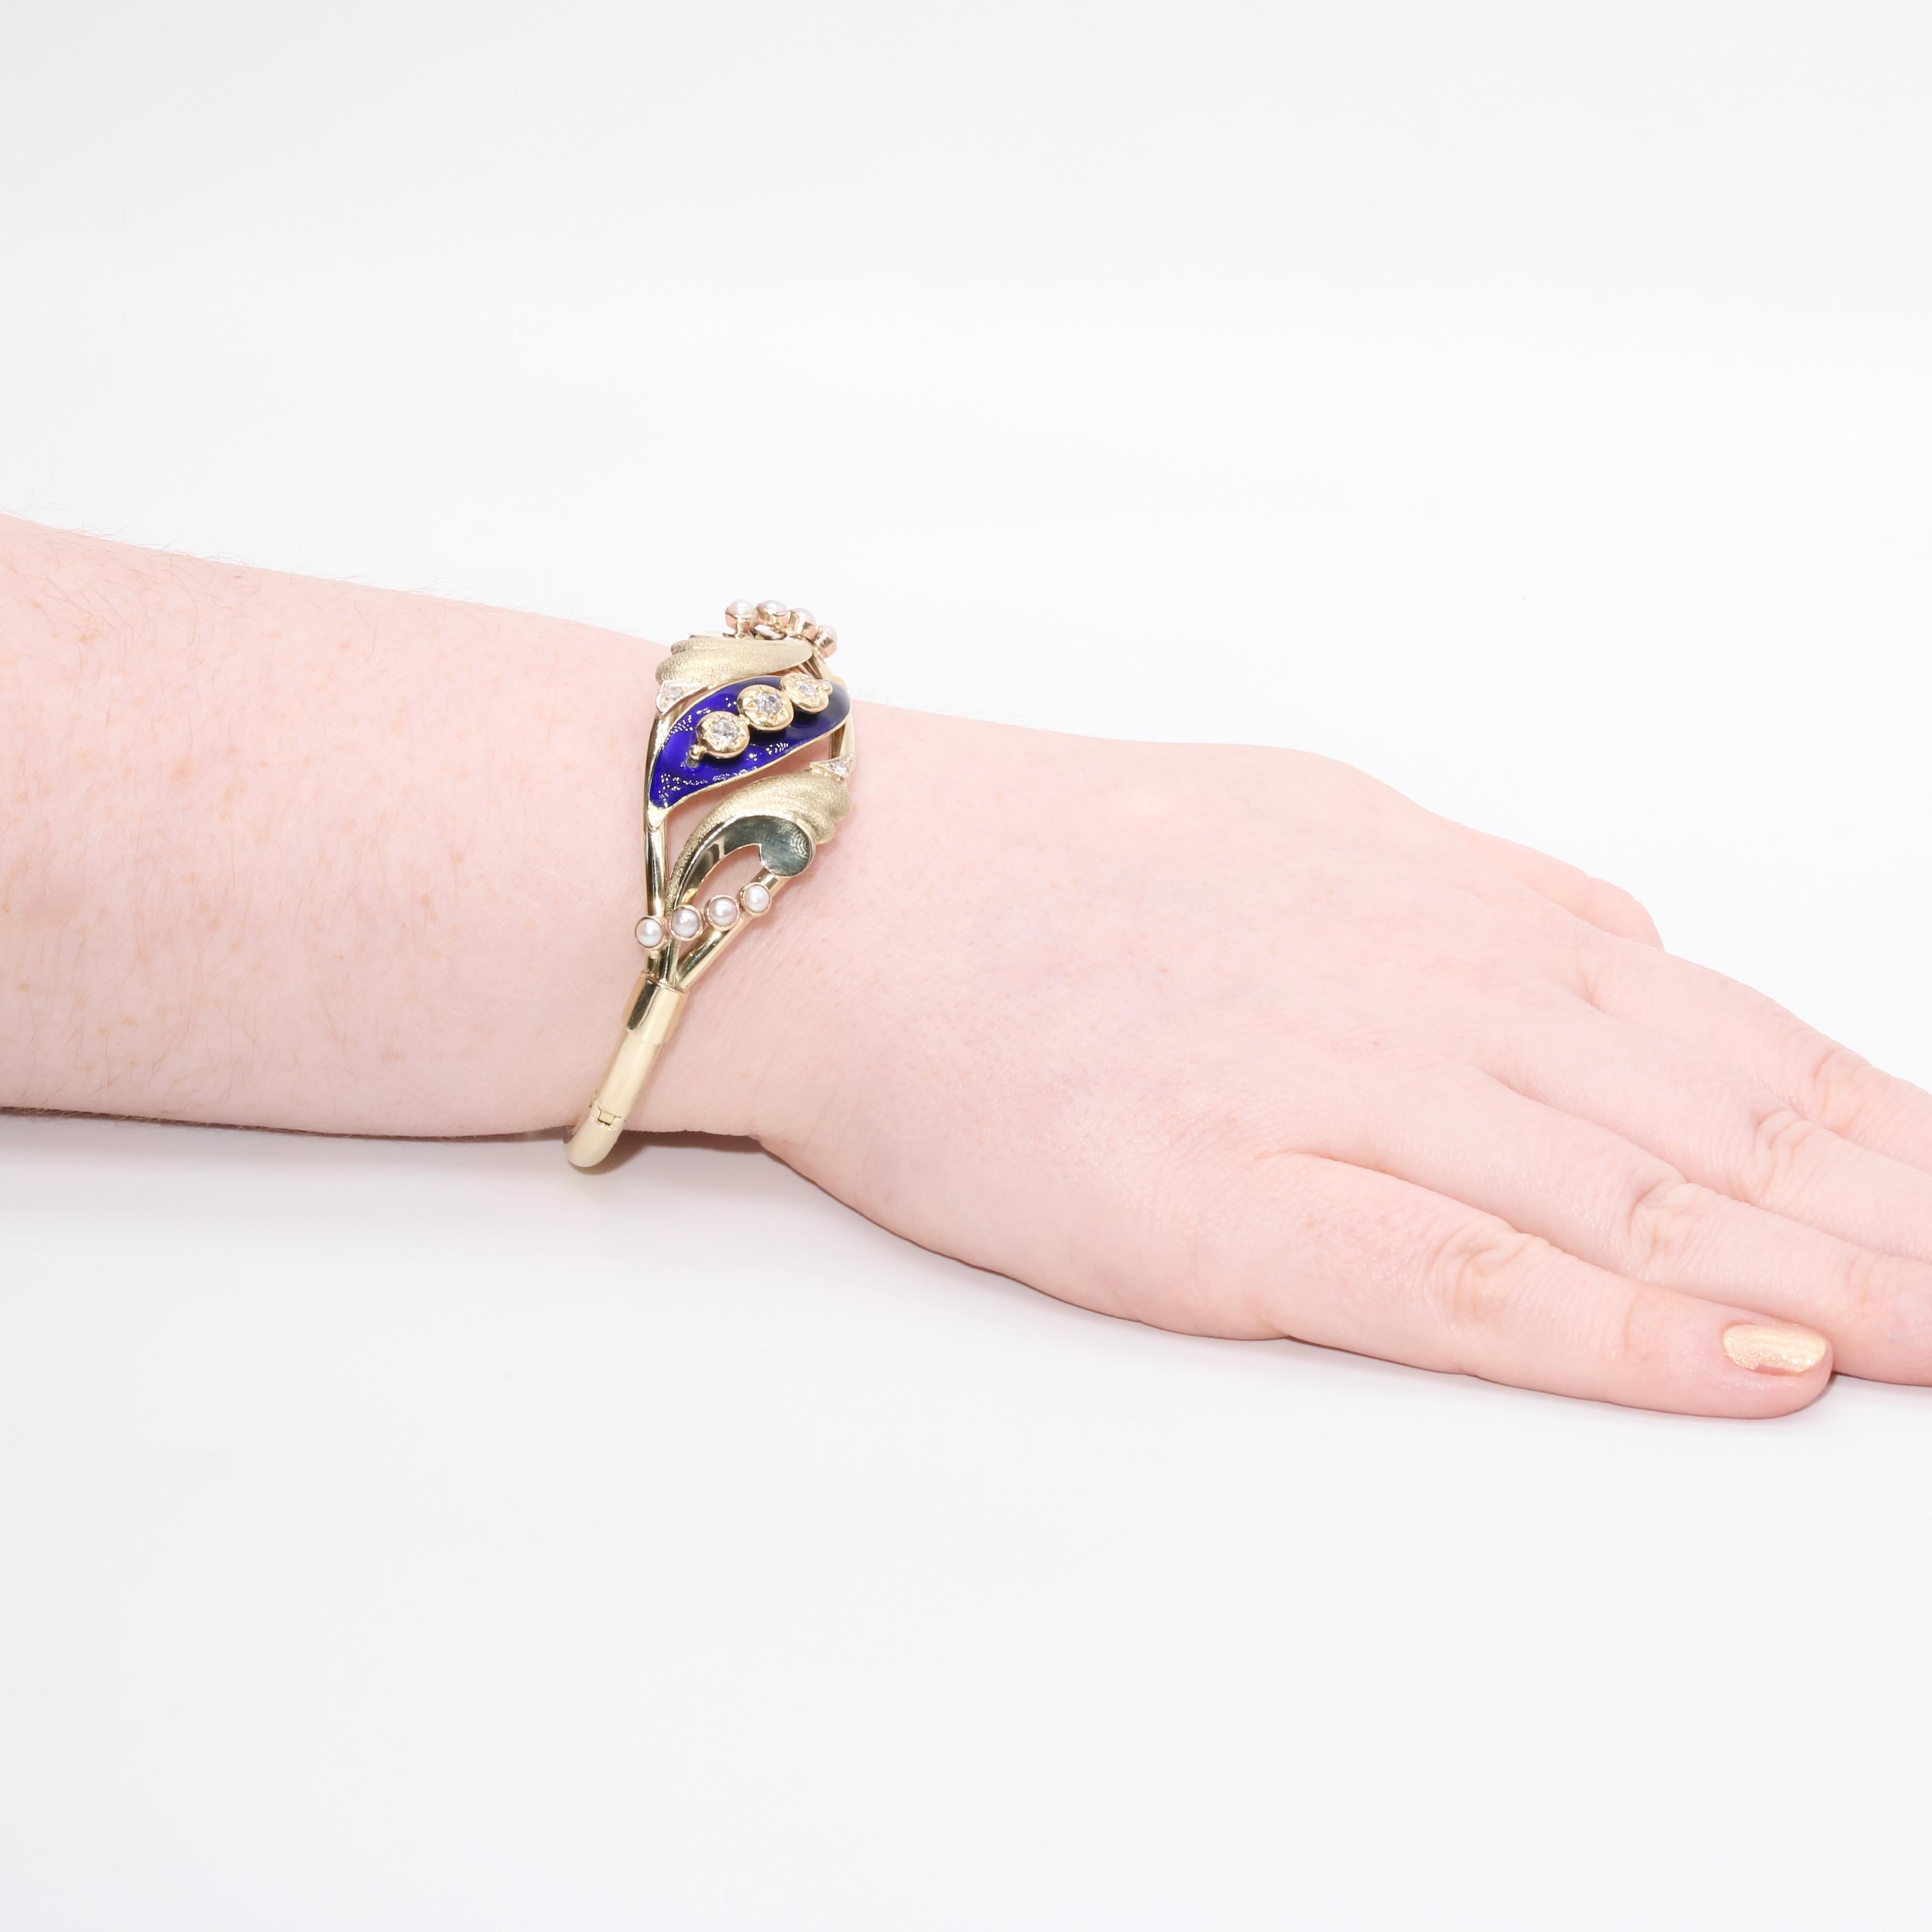 A Victorian, diamond, pearl, enamel, and gold bracelet, comprising five old cut diamonds, eight seed pearls, and blue enamel, set in 14 karat yellow gold. 

This beautiful bracelet has a central leaf-shaped panel, which is adorned in cobalt blue